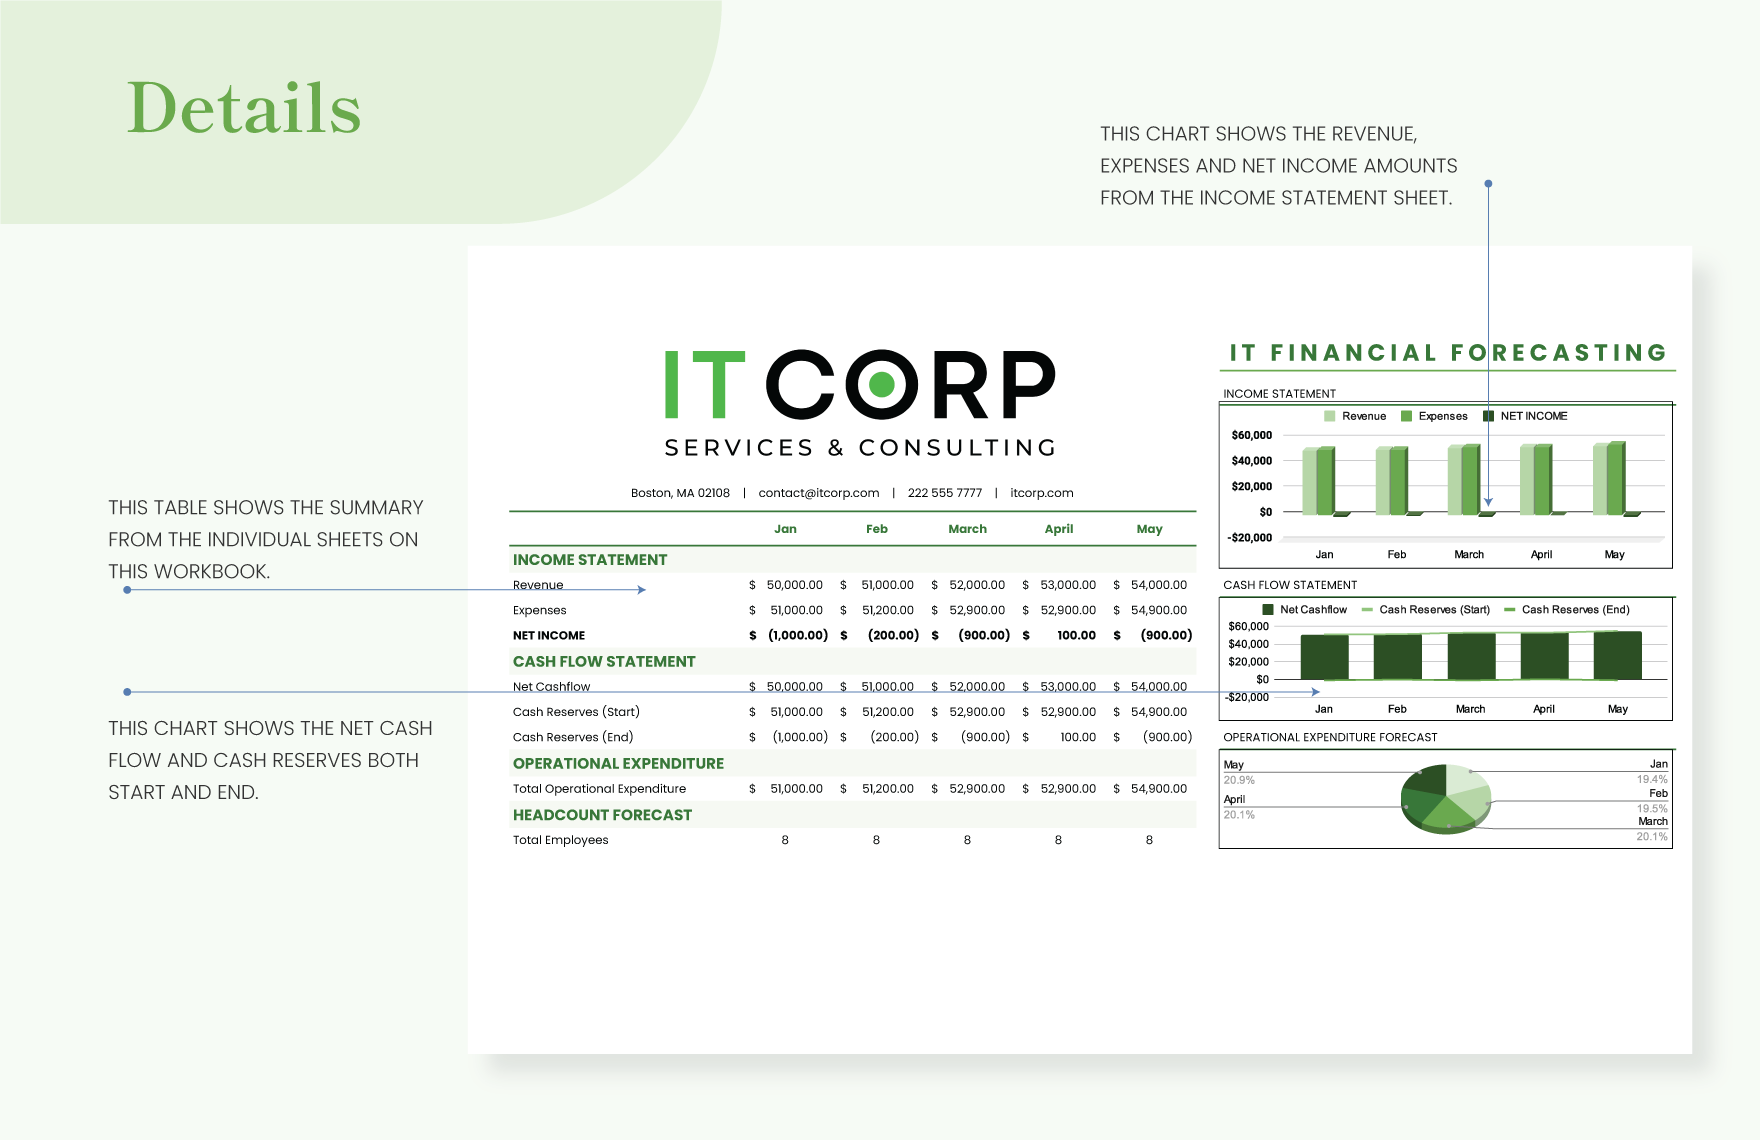 IT Financial Forecasting Sheet Template